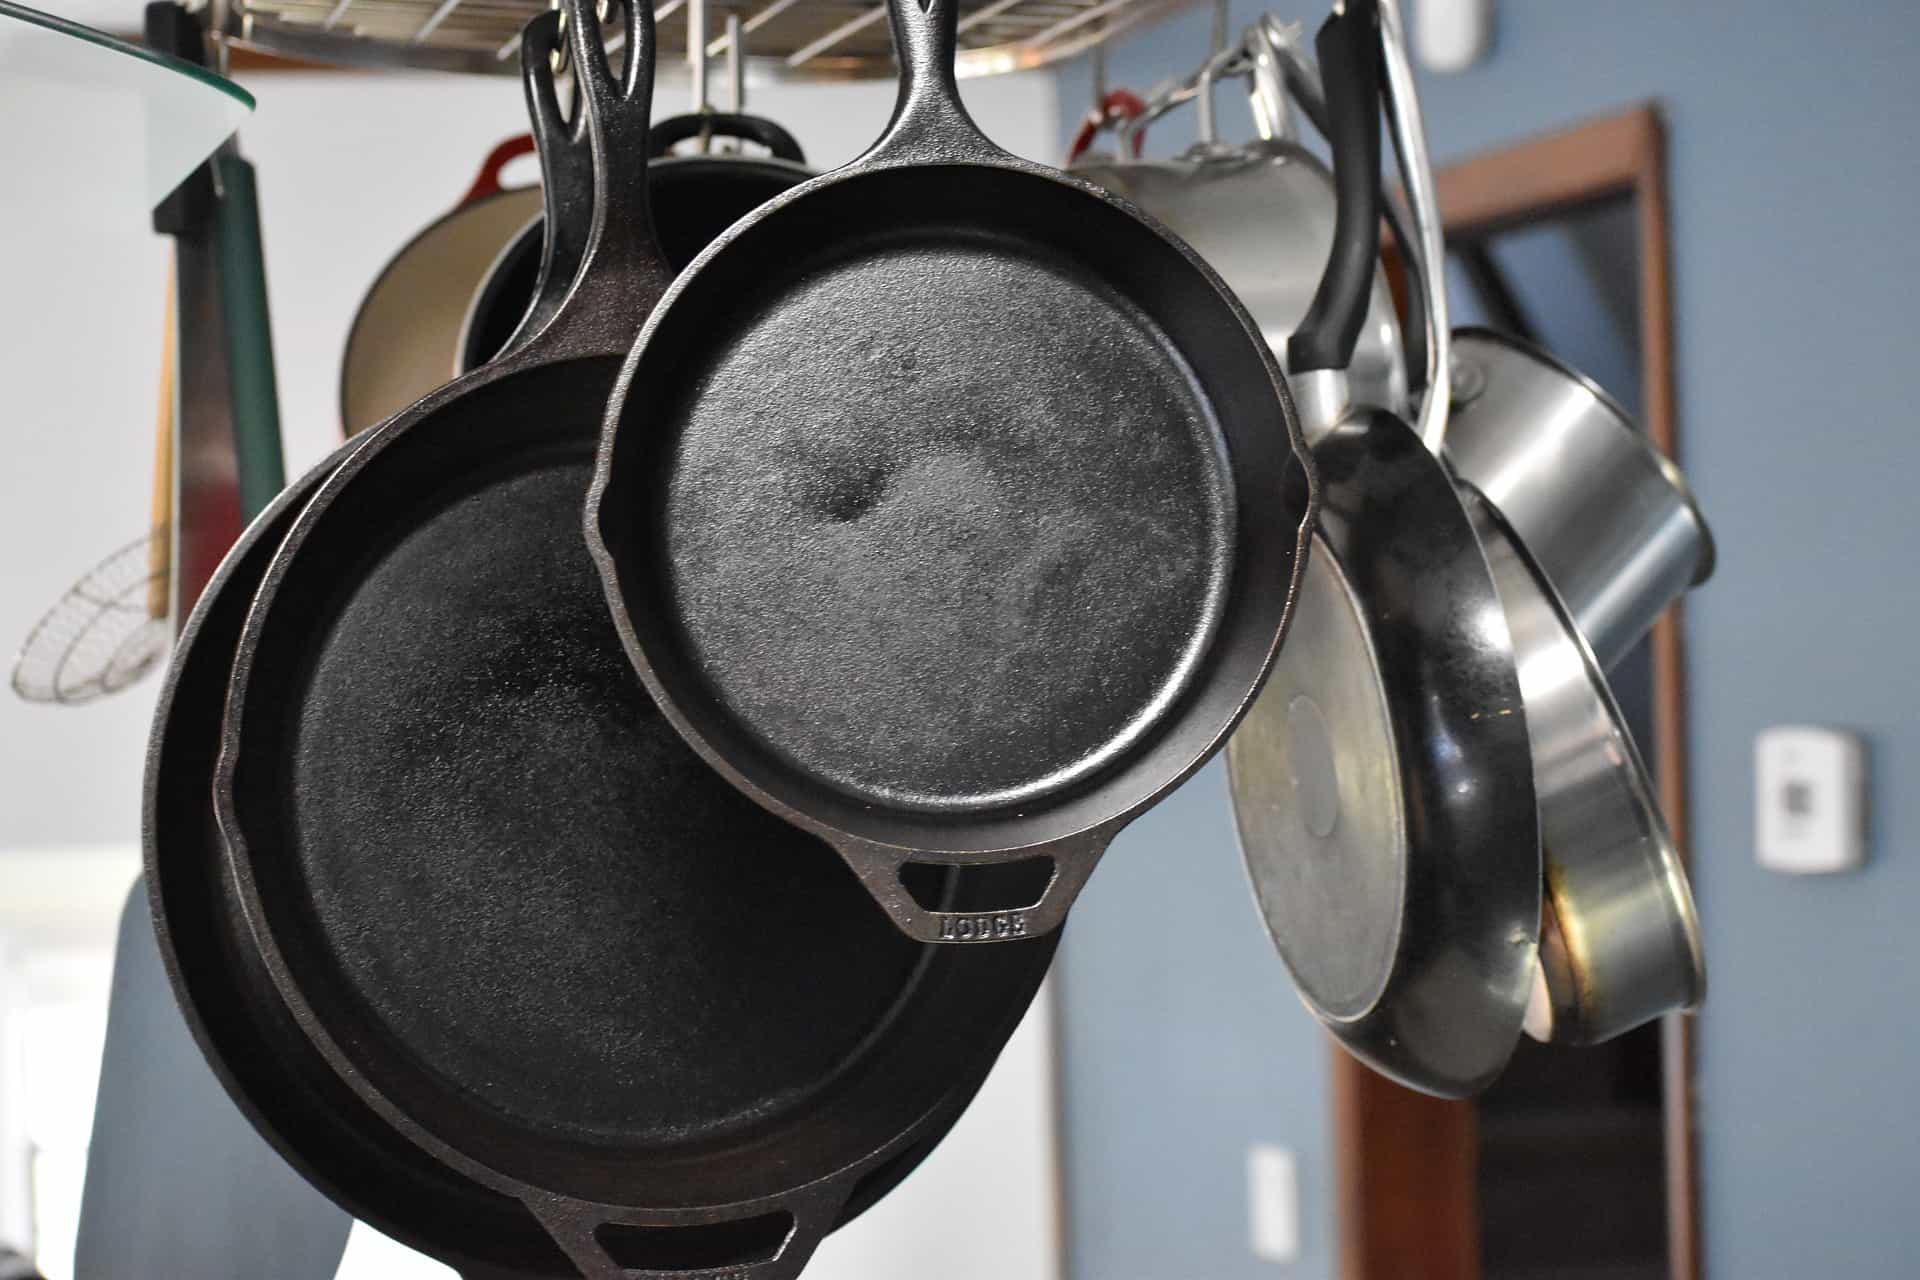 The Health and Tasty Benefits of Using Cast Iron Tawa for Roti or